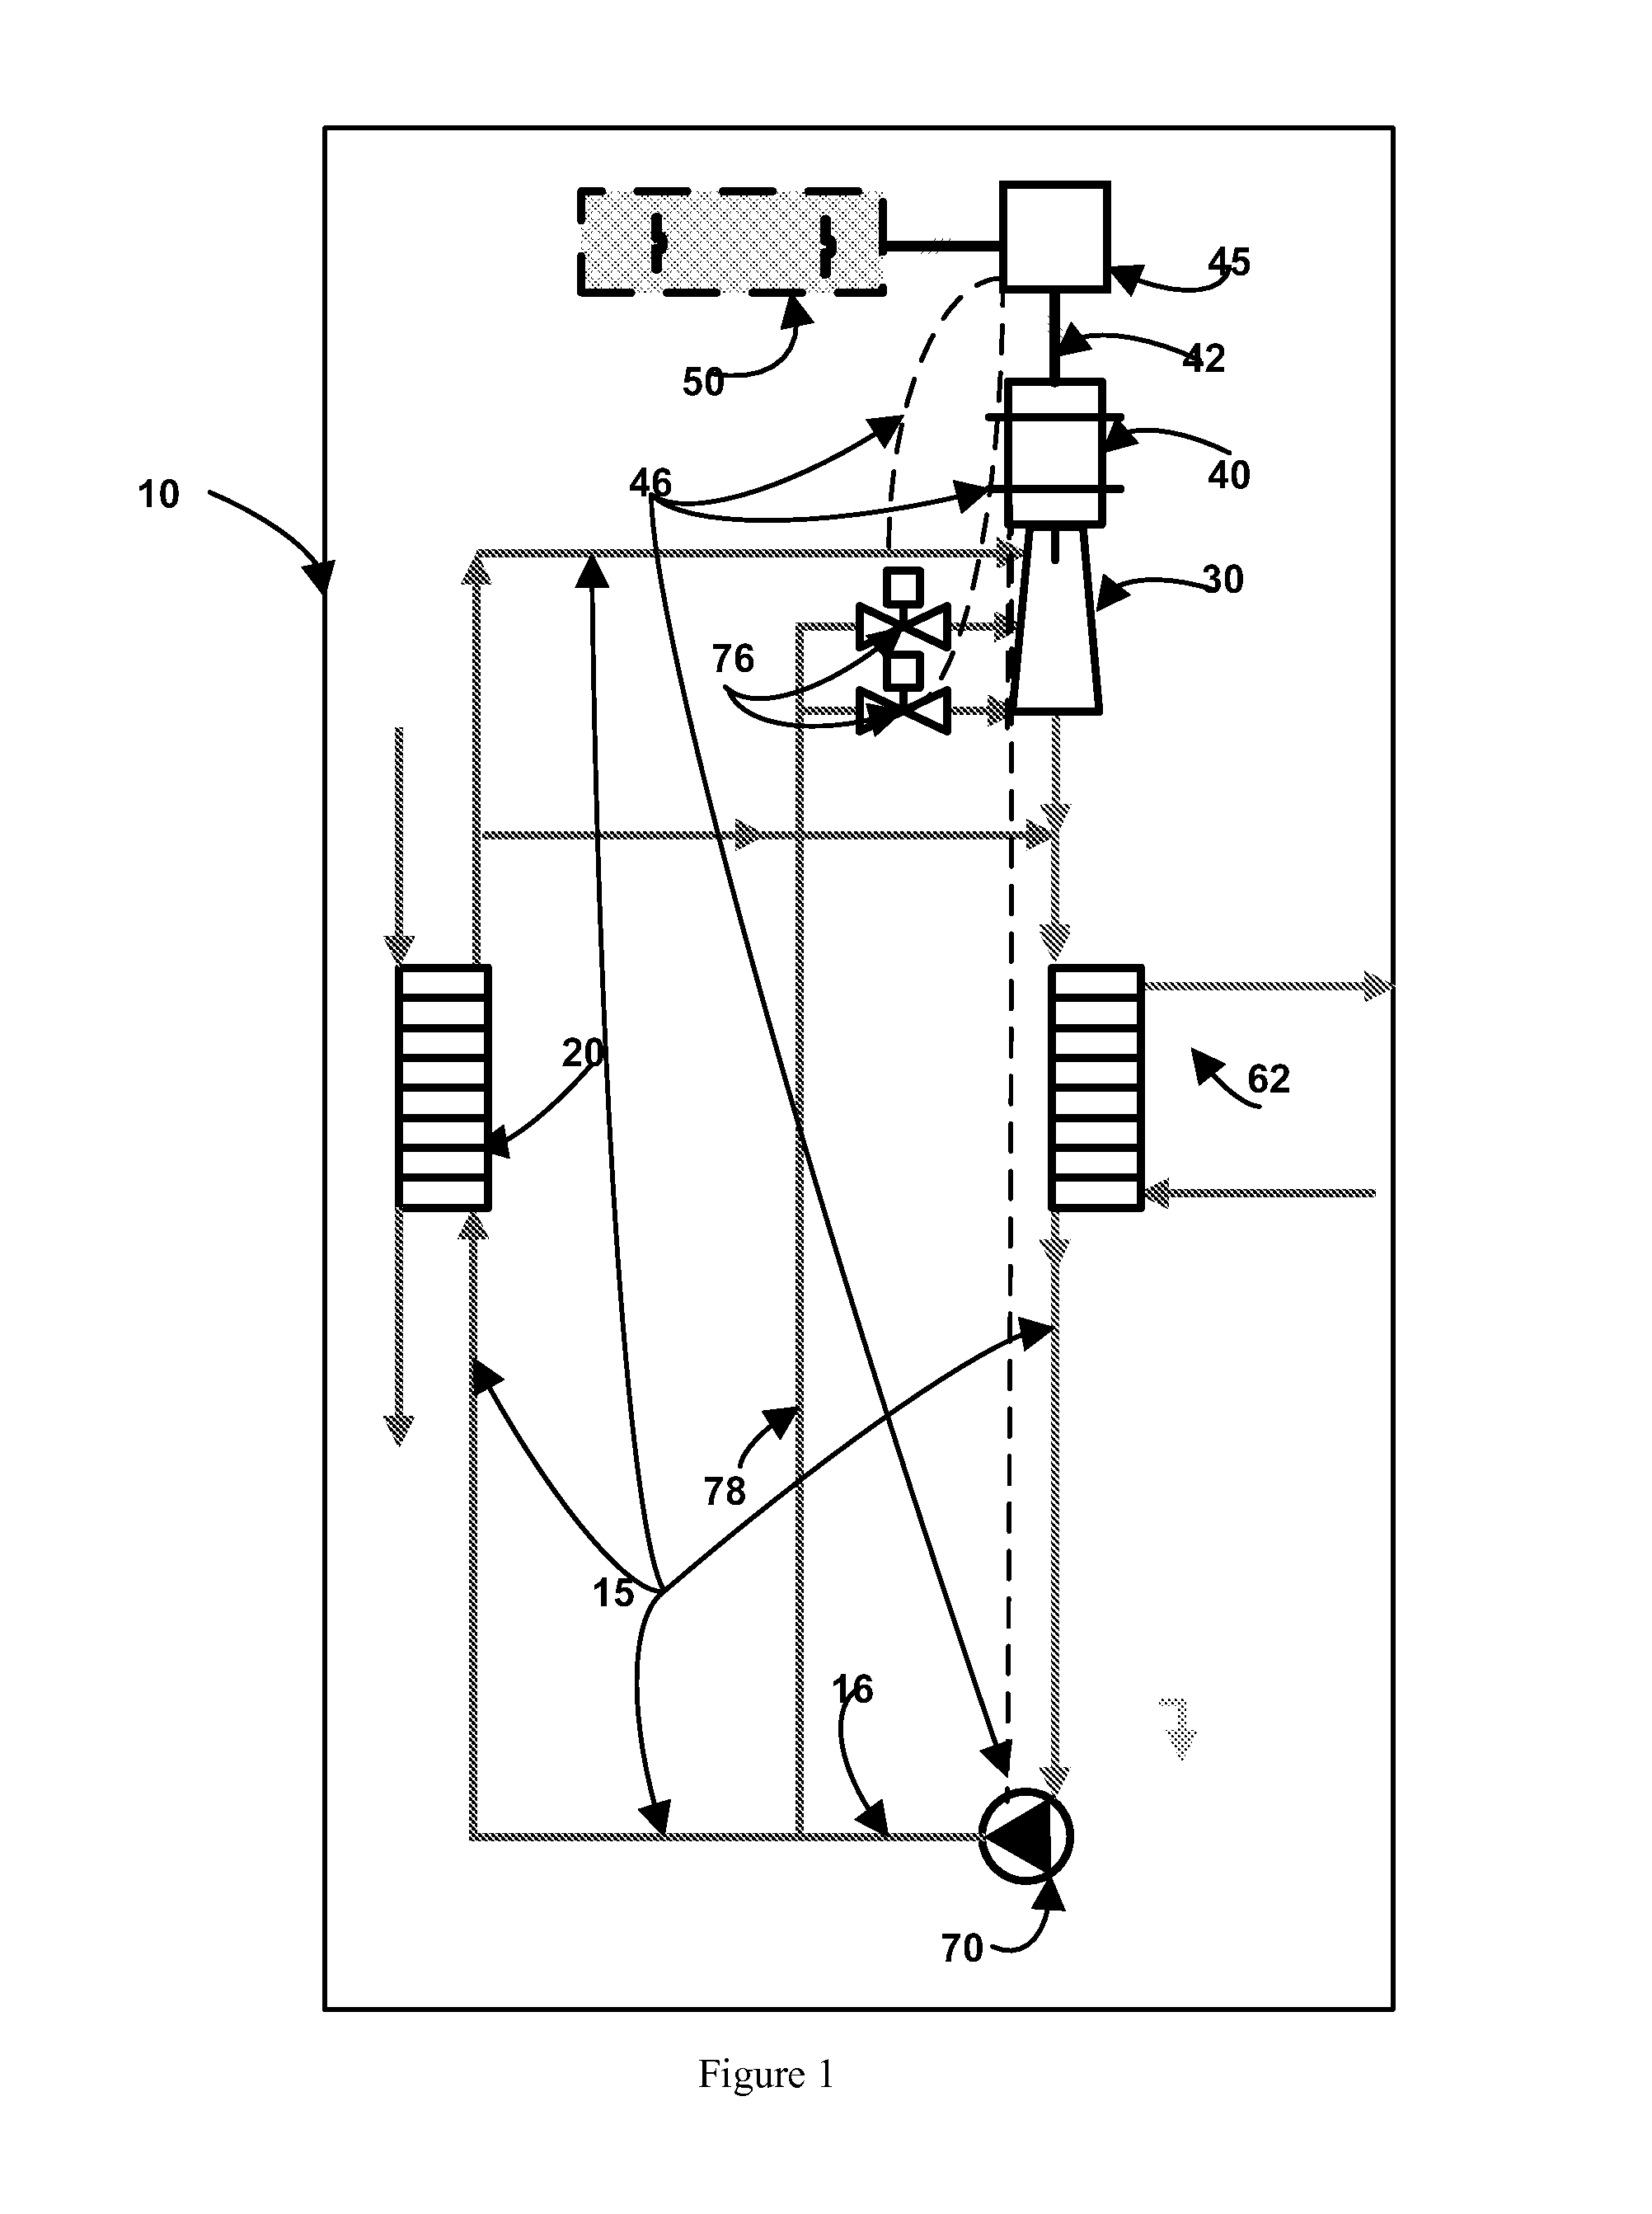 Apparatus and method for producing sustainable power and heat